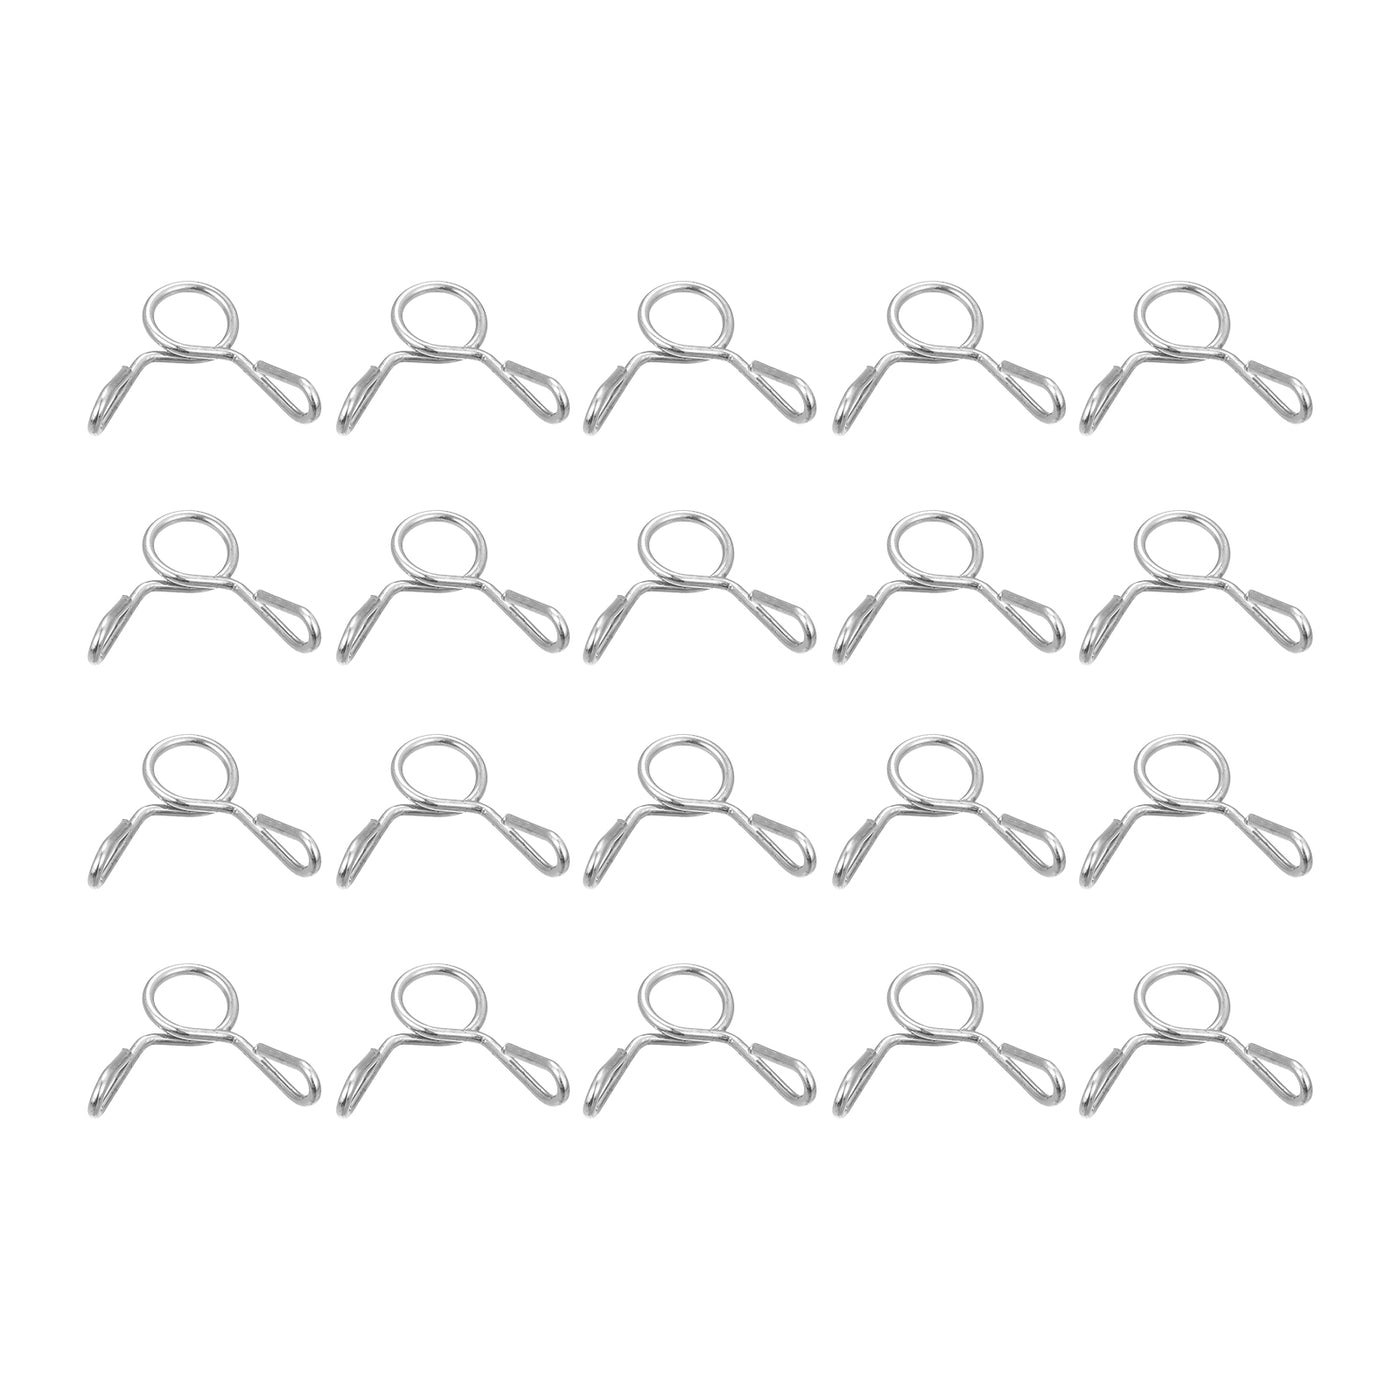 Uxcell Uxcell Fuel Line Hose Clips, 20pcs 26mm 304 Stainless Steel Tube Spring Clamps(Silver)